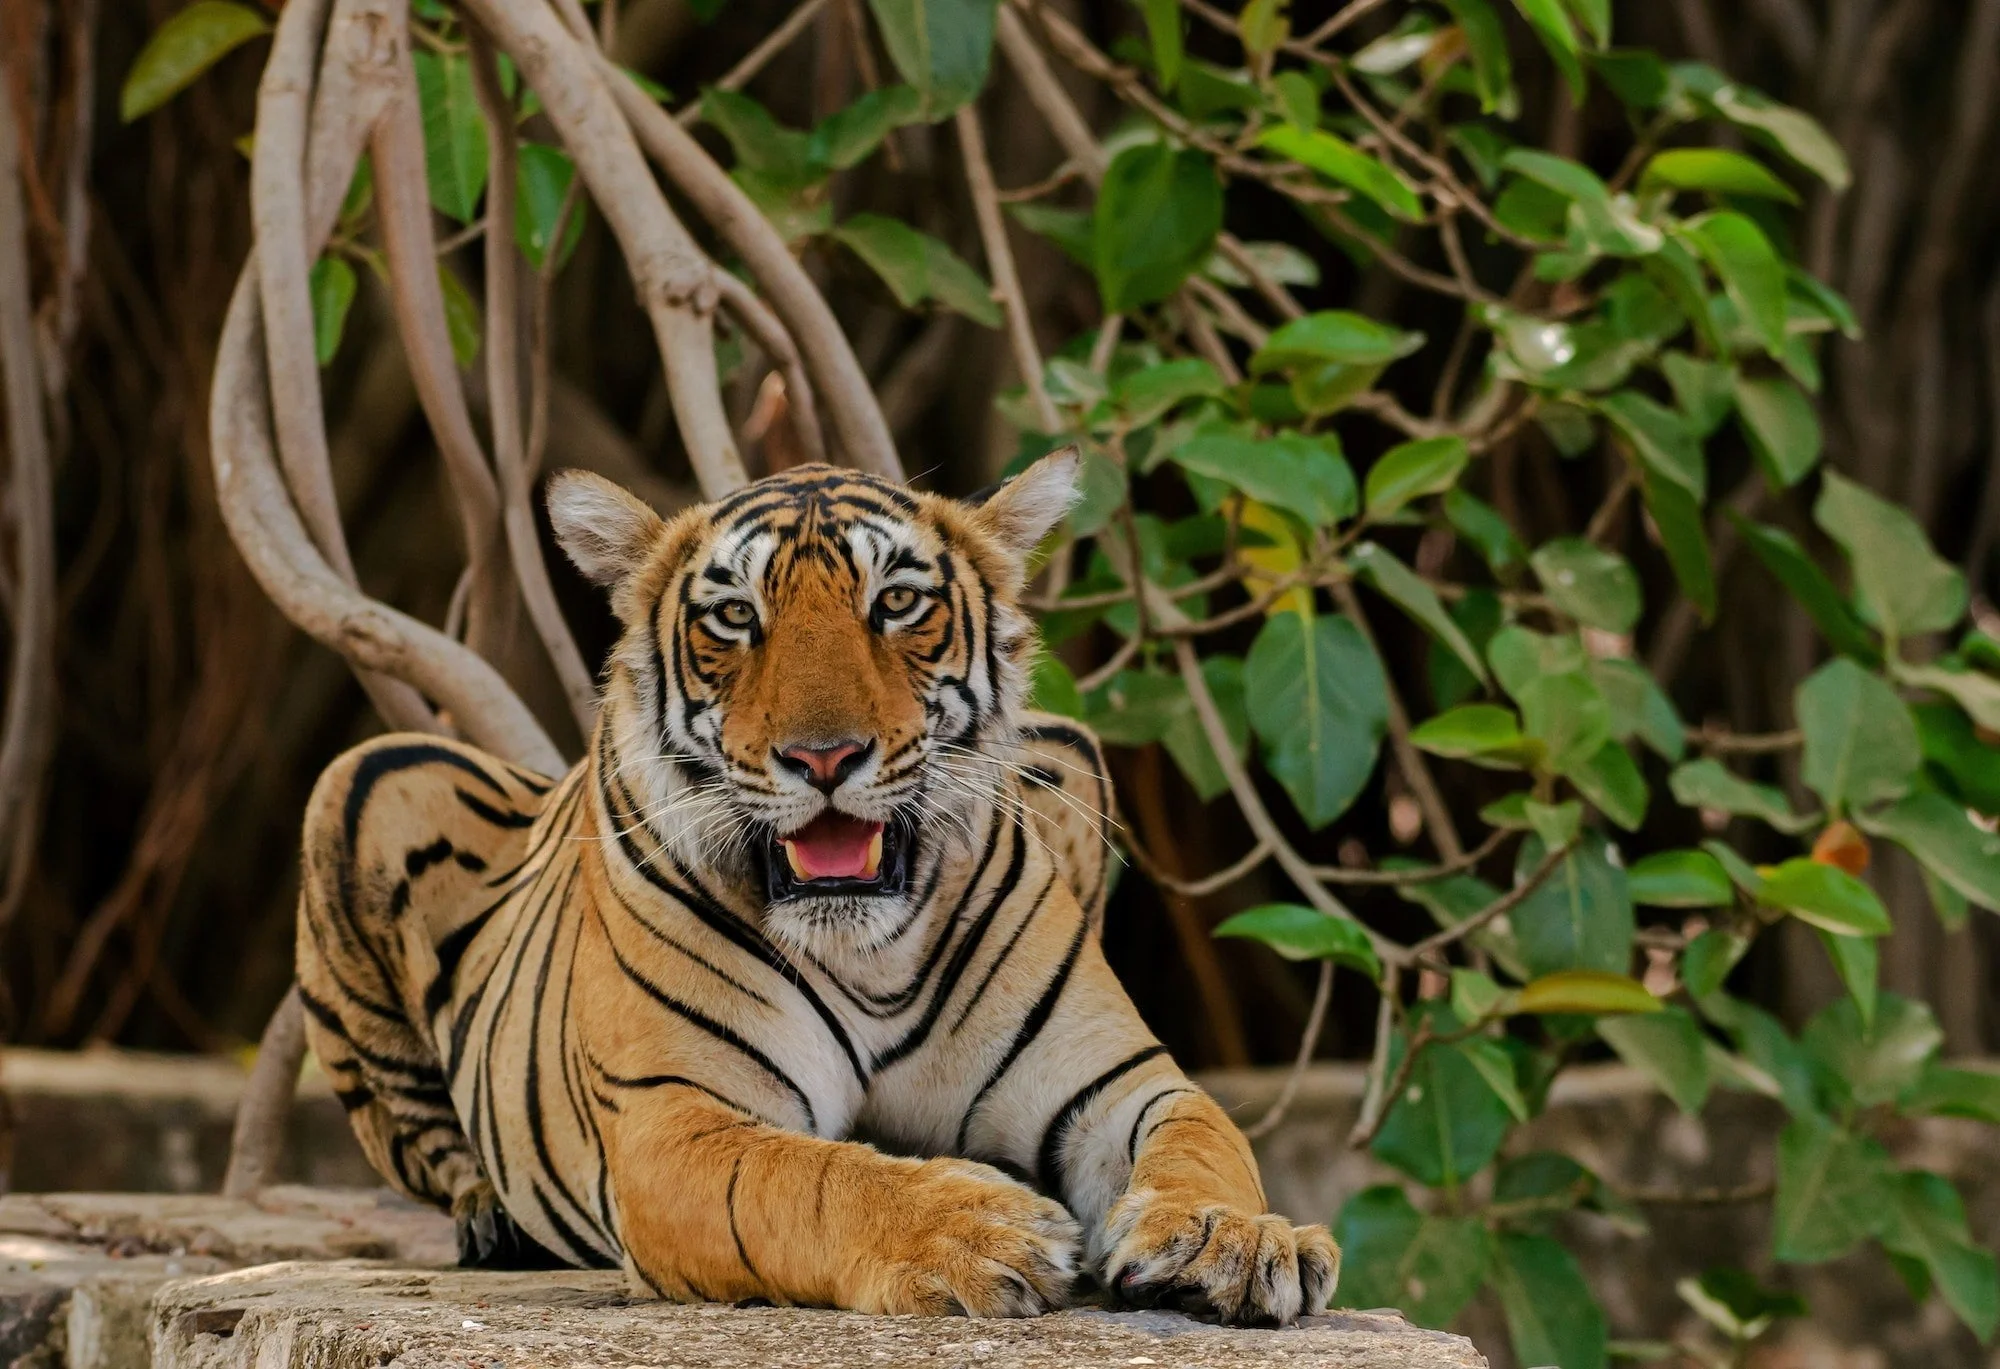 Wild tiger laying down on rocks with its mouth open looking towards the camera